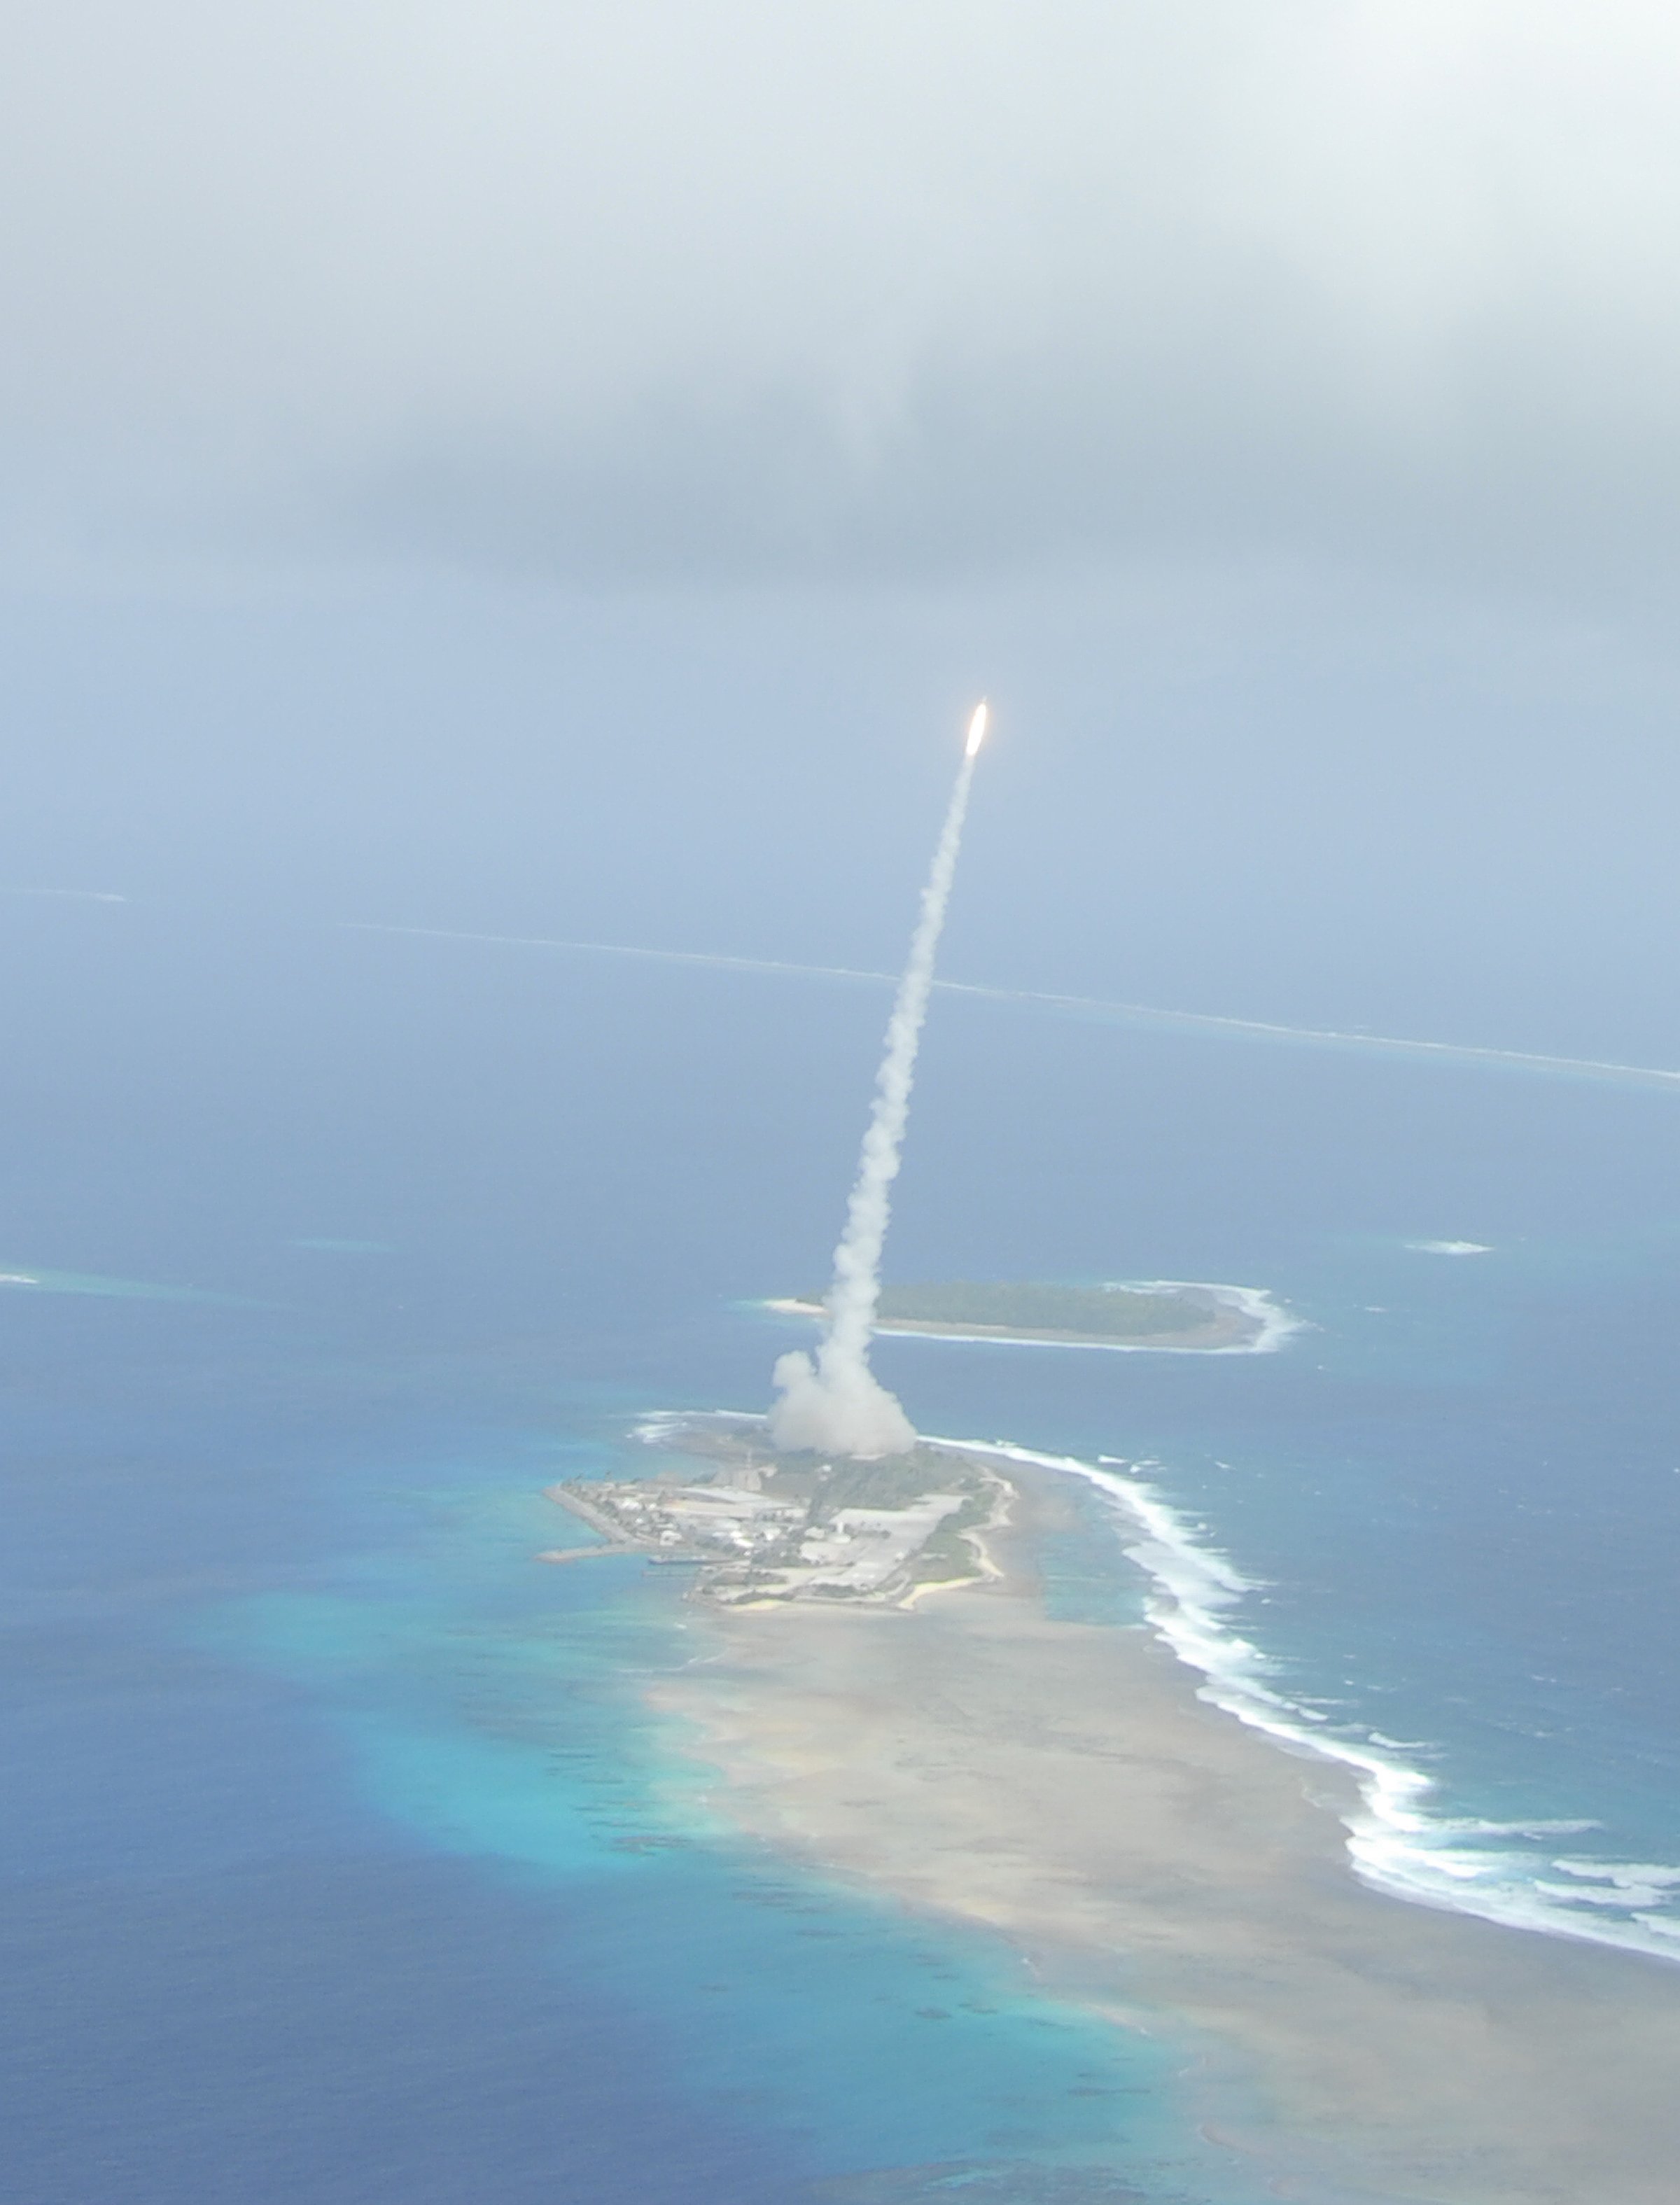 A target missile launch from Kwajalein Atoll in the Republic of the Marshall Islands